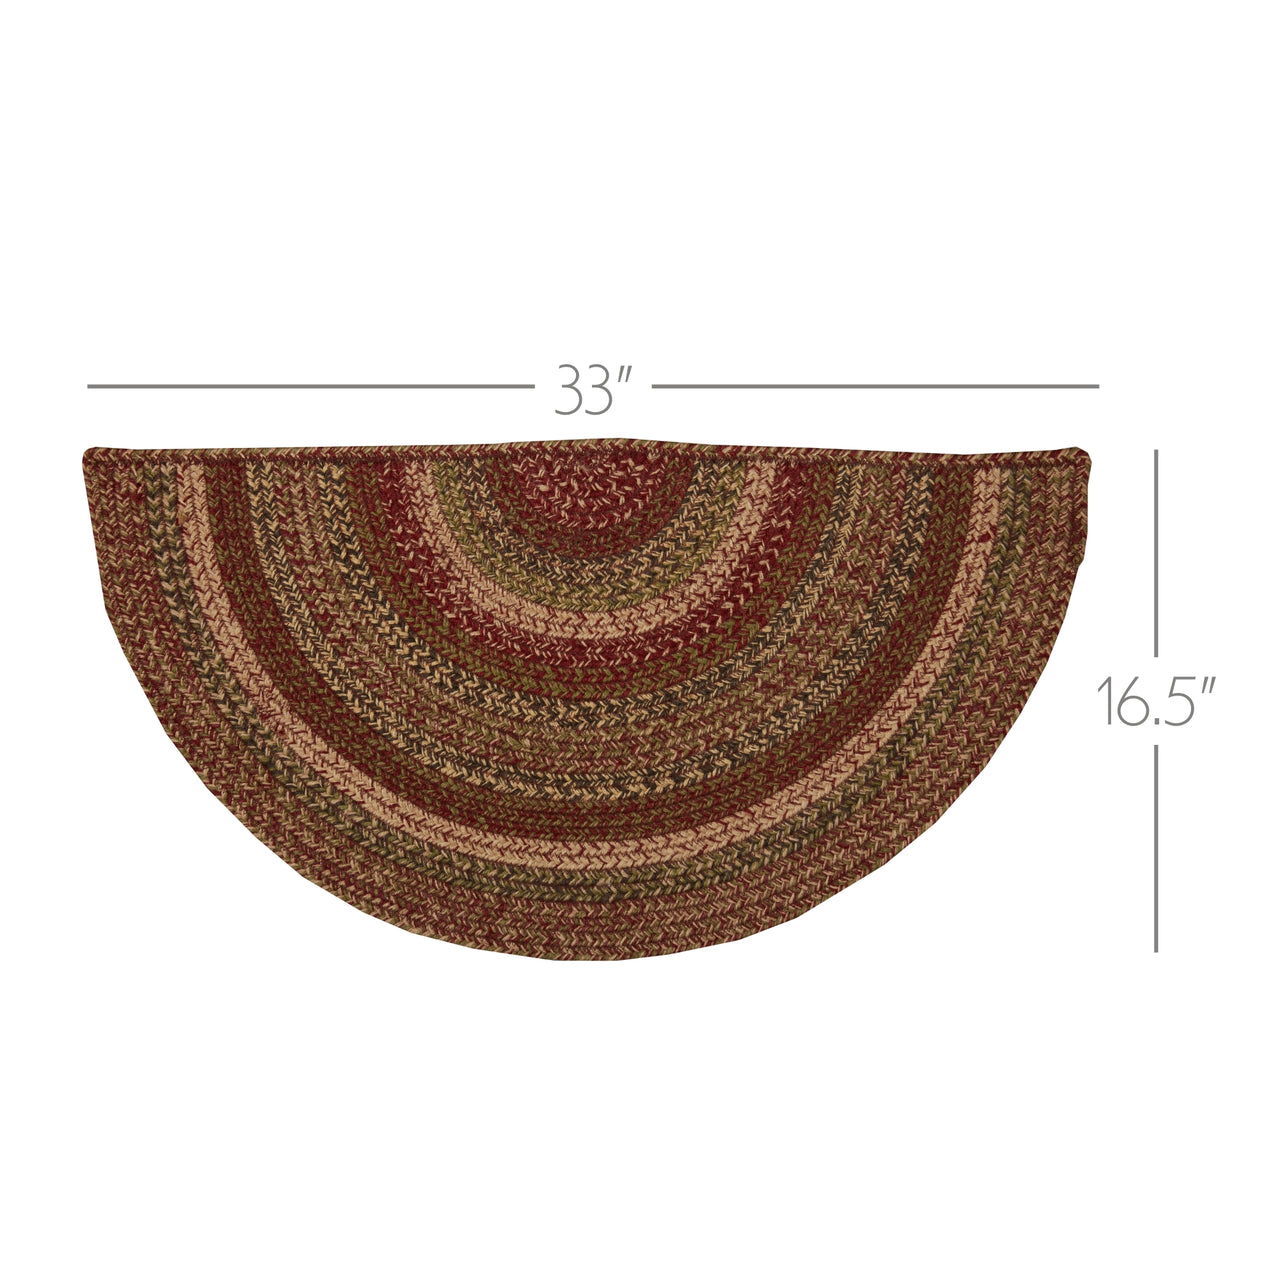 Cider Mill Jute Braided Rug Half Circle 16.5"x33" with Rug Pad VHC Brands